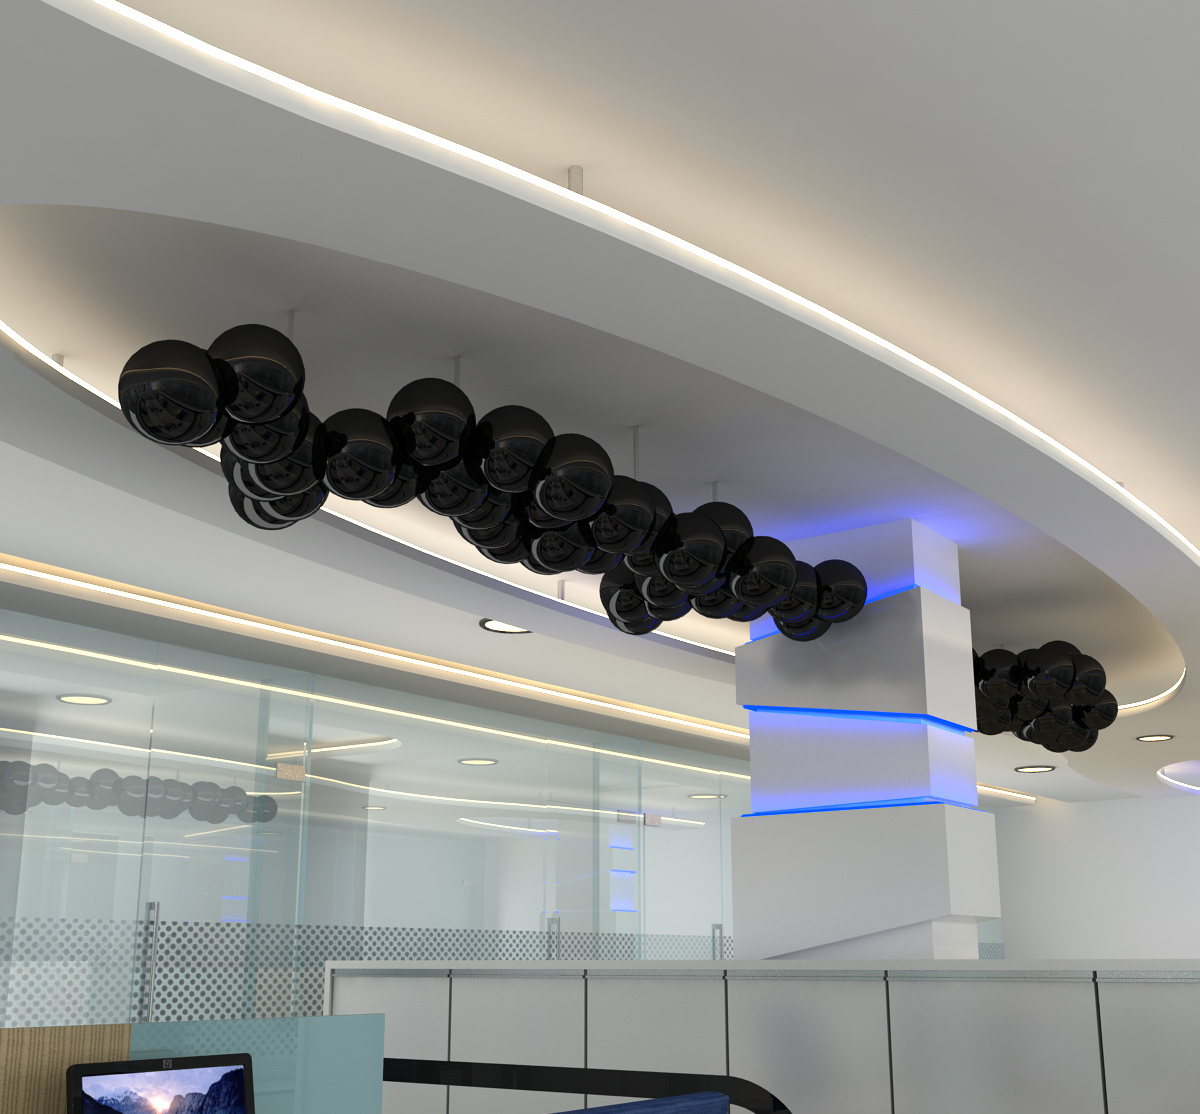 Ceiling design with carbon particle theme